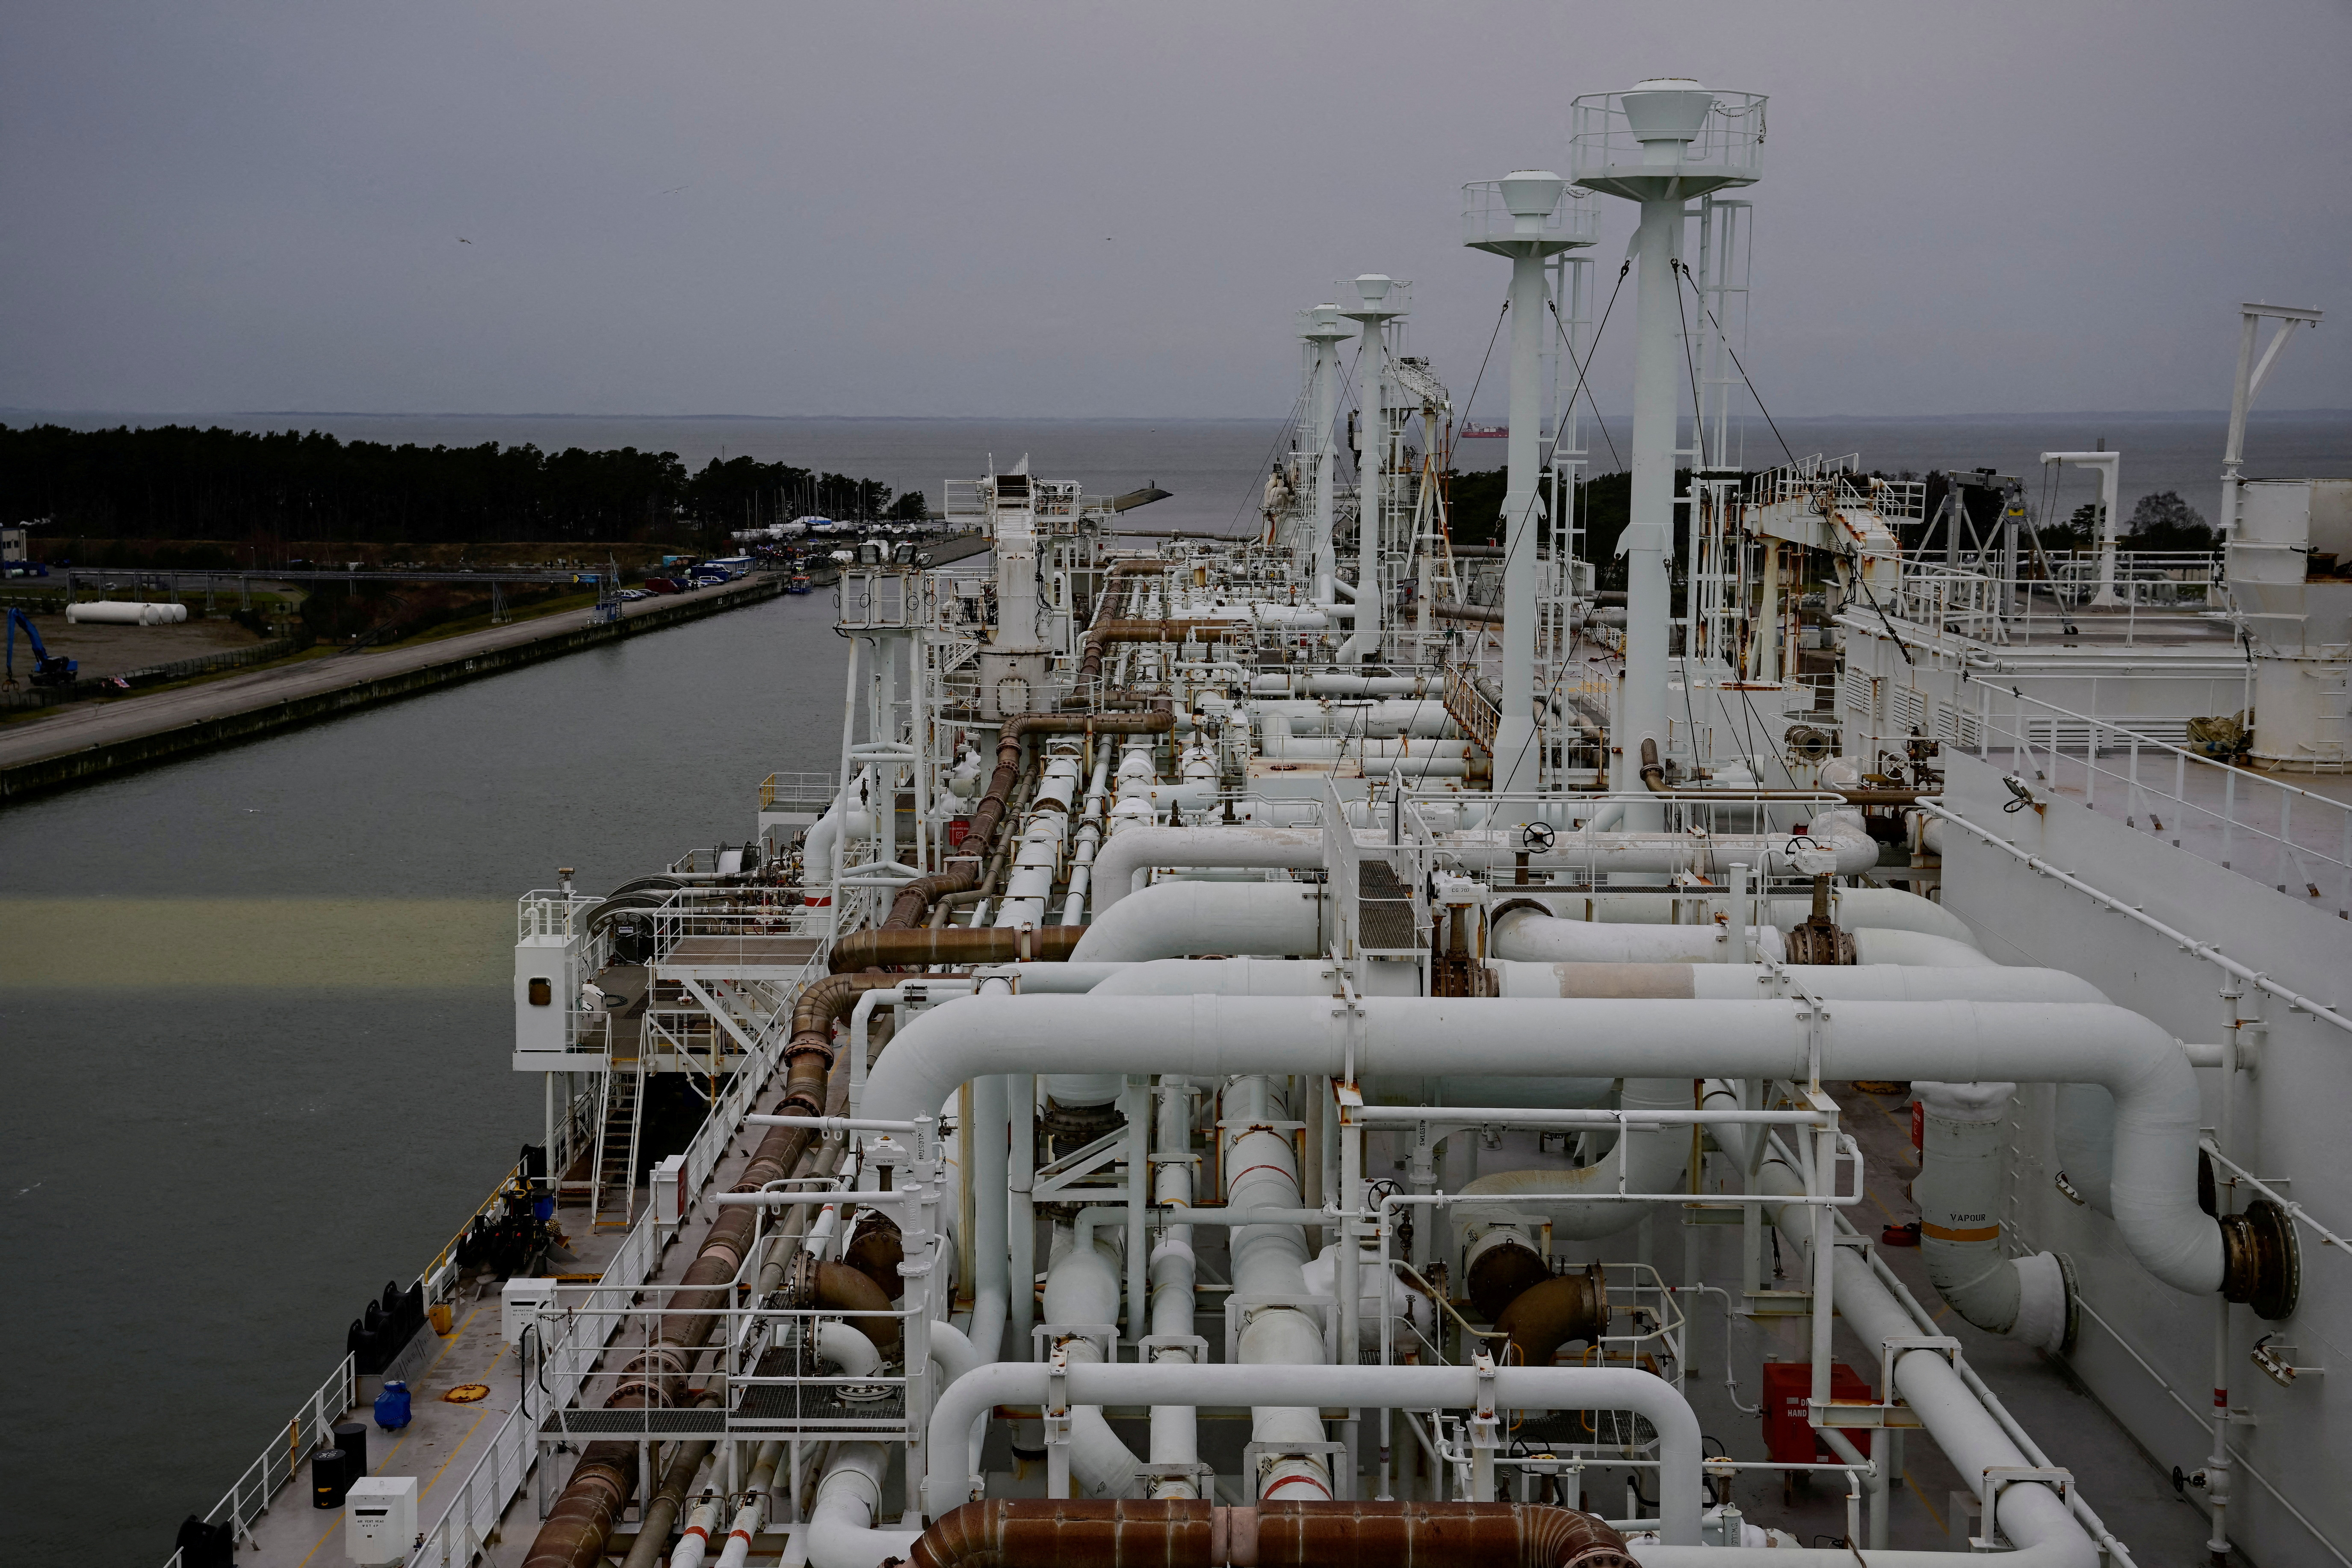 Germany inaugurates LNG terminal "Deutsche Ostsee" in Lubmin